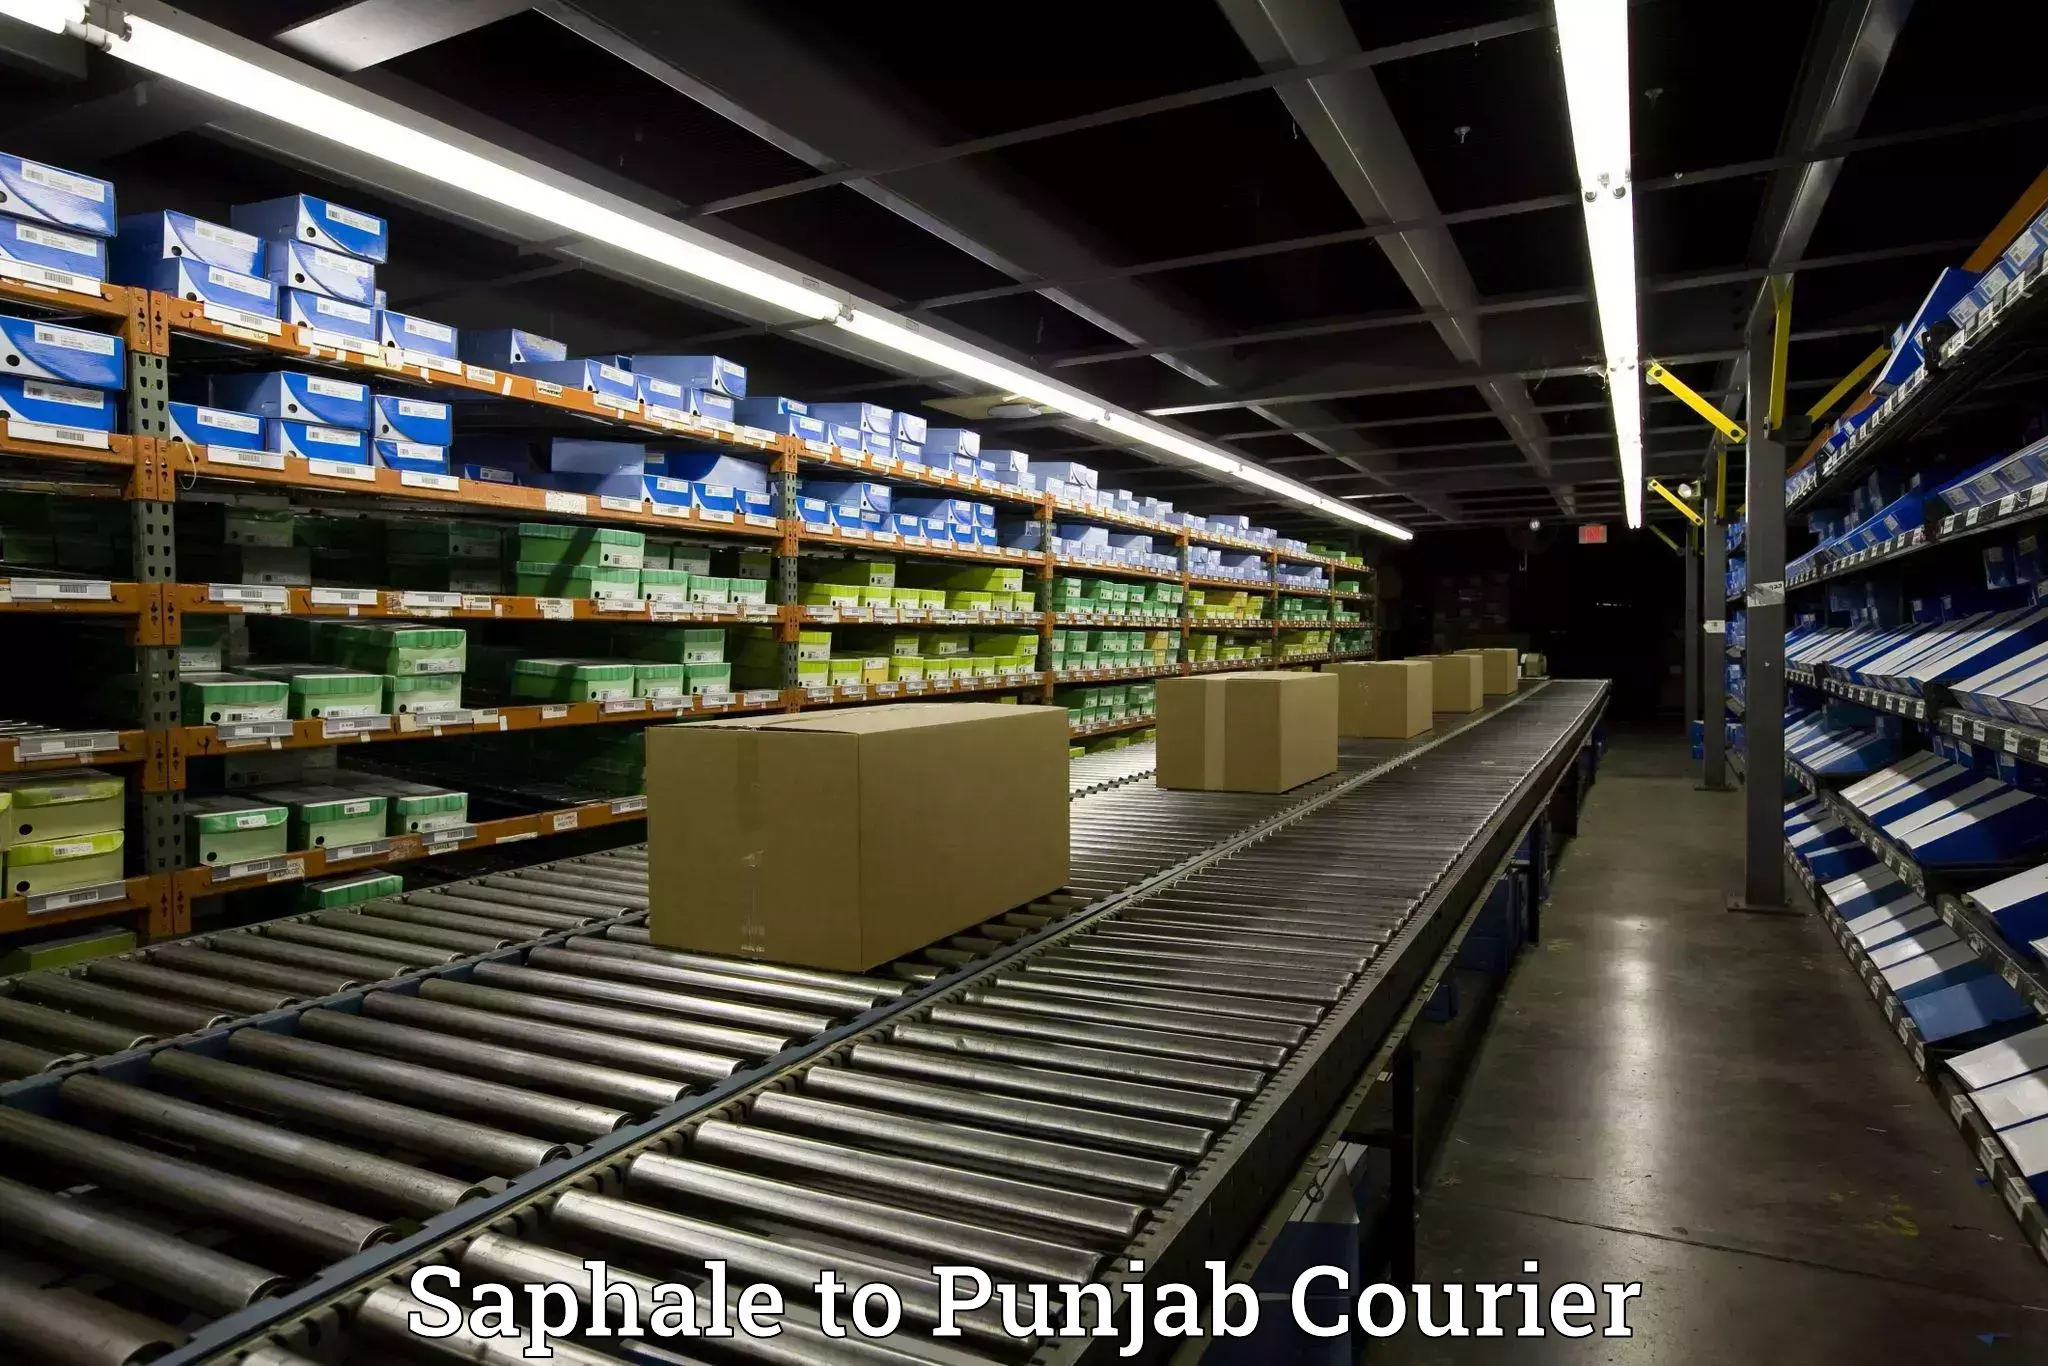 Trusted relocation services Saphale to Punjab